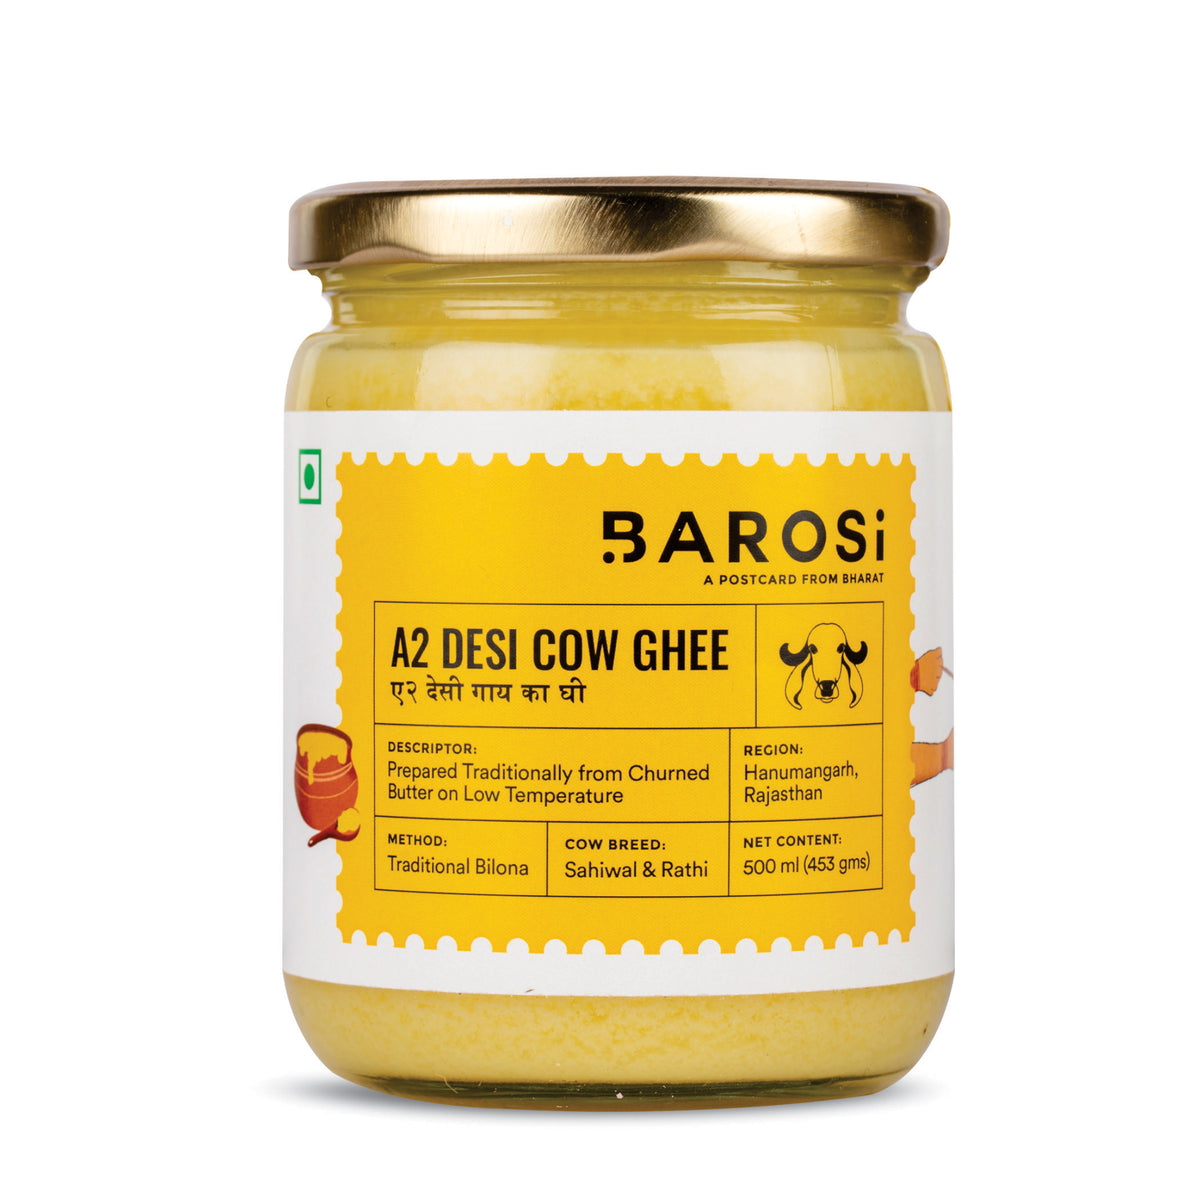 Barosi A2 Desi Cow Ghee 500 ml, Produced from Grass fed Desi Cow Milk, Aromatic and Pure, Bilona method, Sustainable Glass Packaging